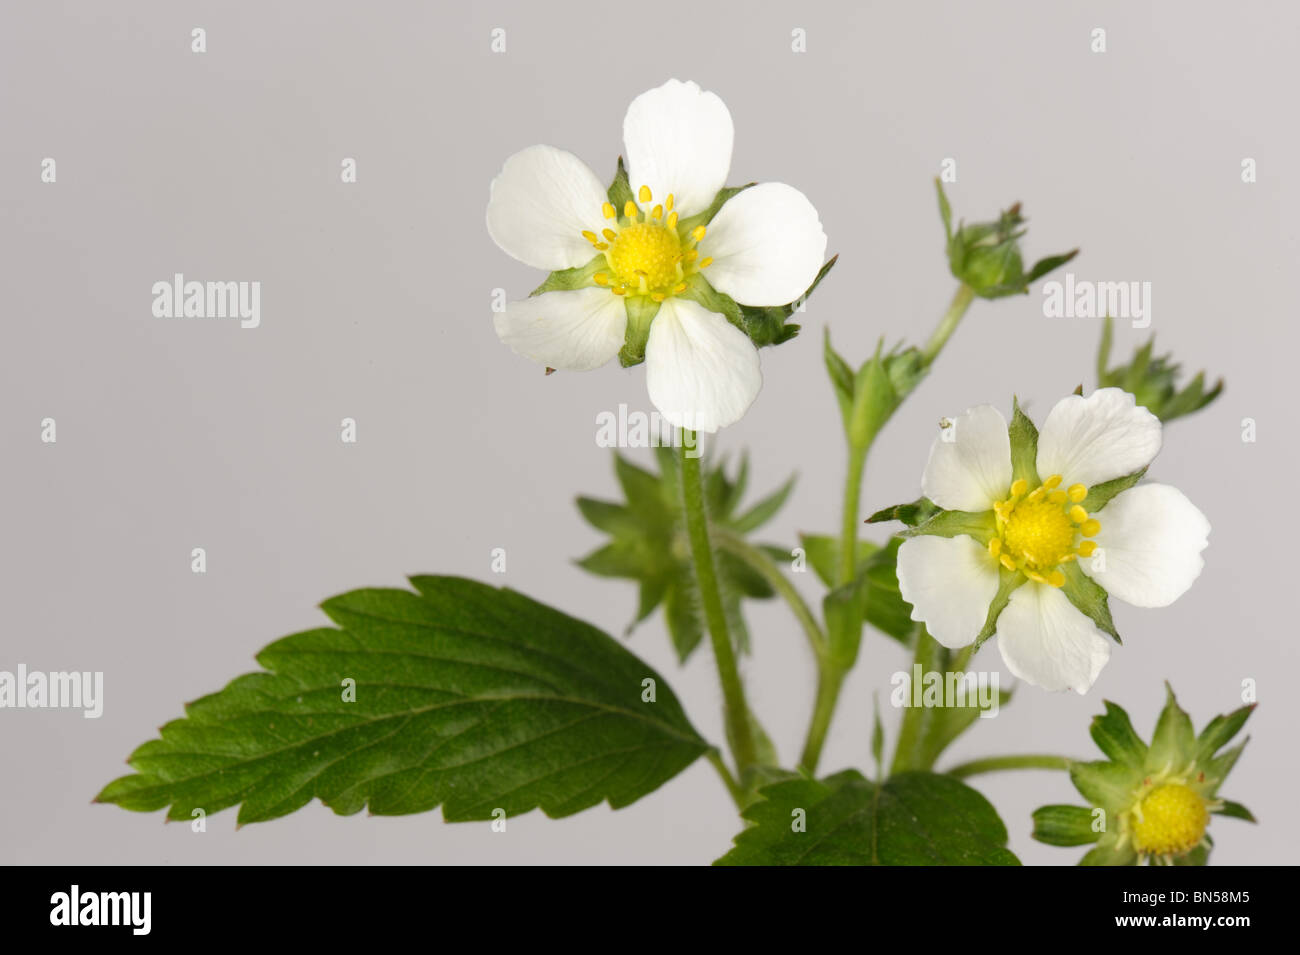 Wild strawberry (Fragaria vesca) flower showing petals, calyx and leaves on a white background Stock Photo